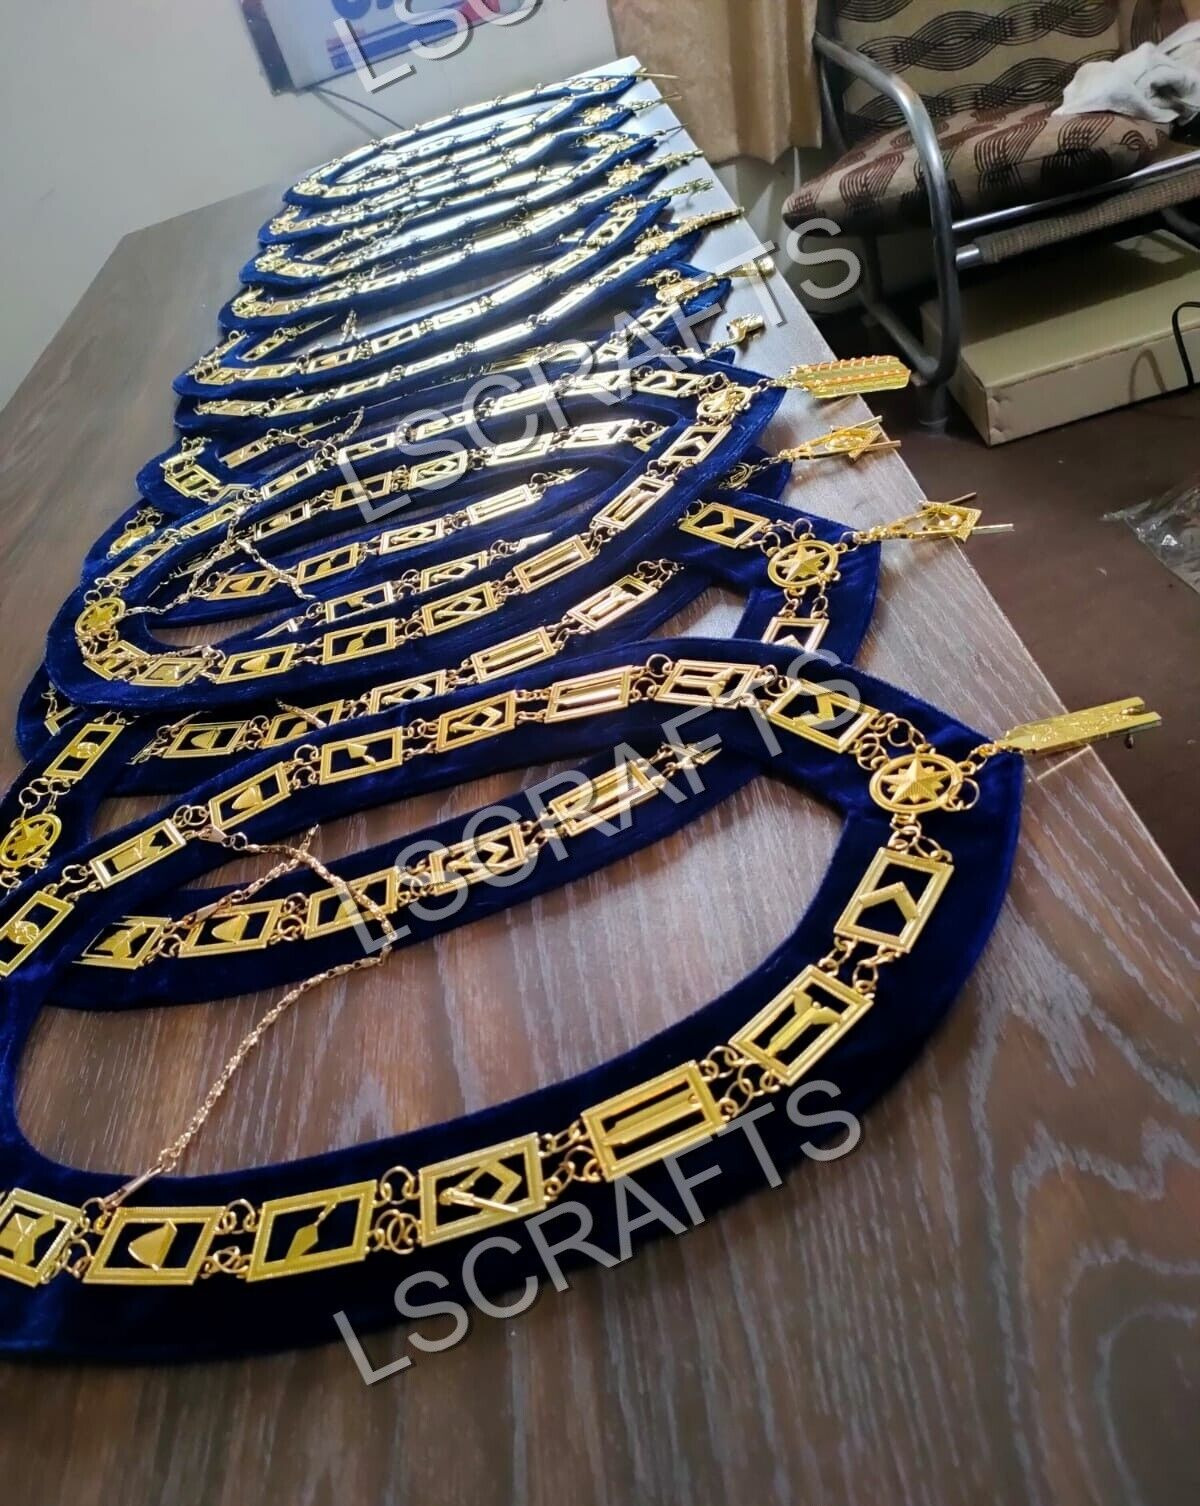 Masonic Blue Lodge Gold Officer Chain Collars With Jewels Set of 12 PCS